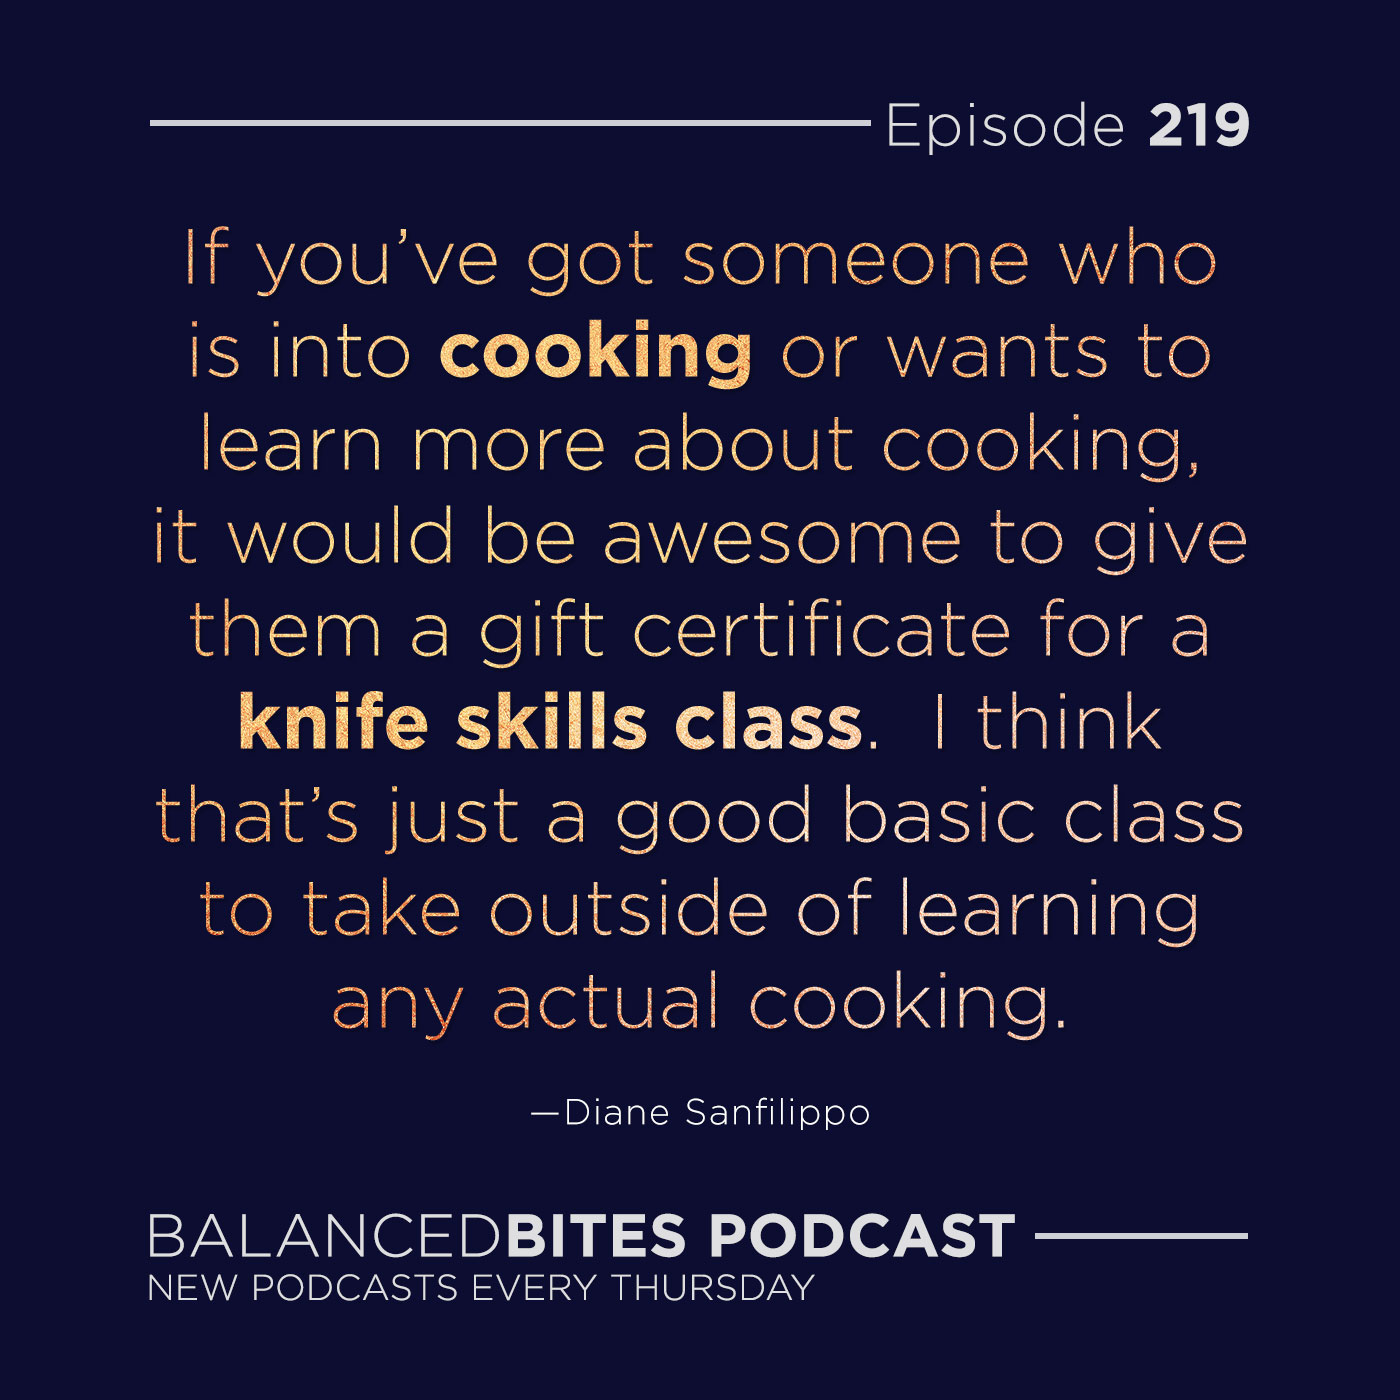 Quotes-shareables_episode-219-knife